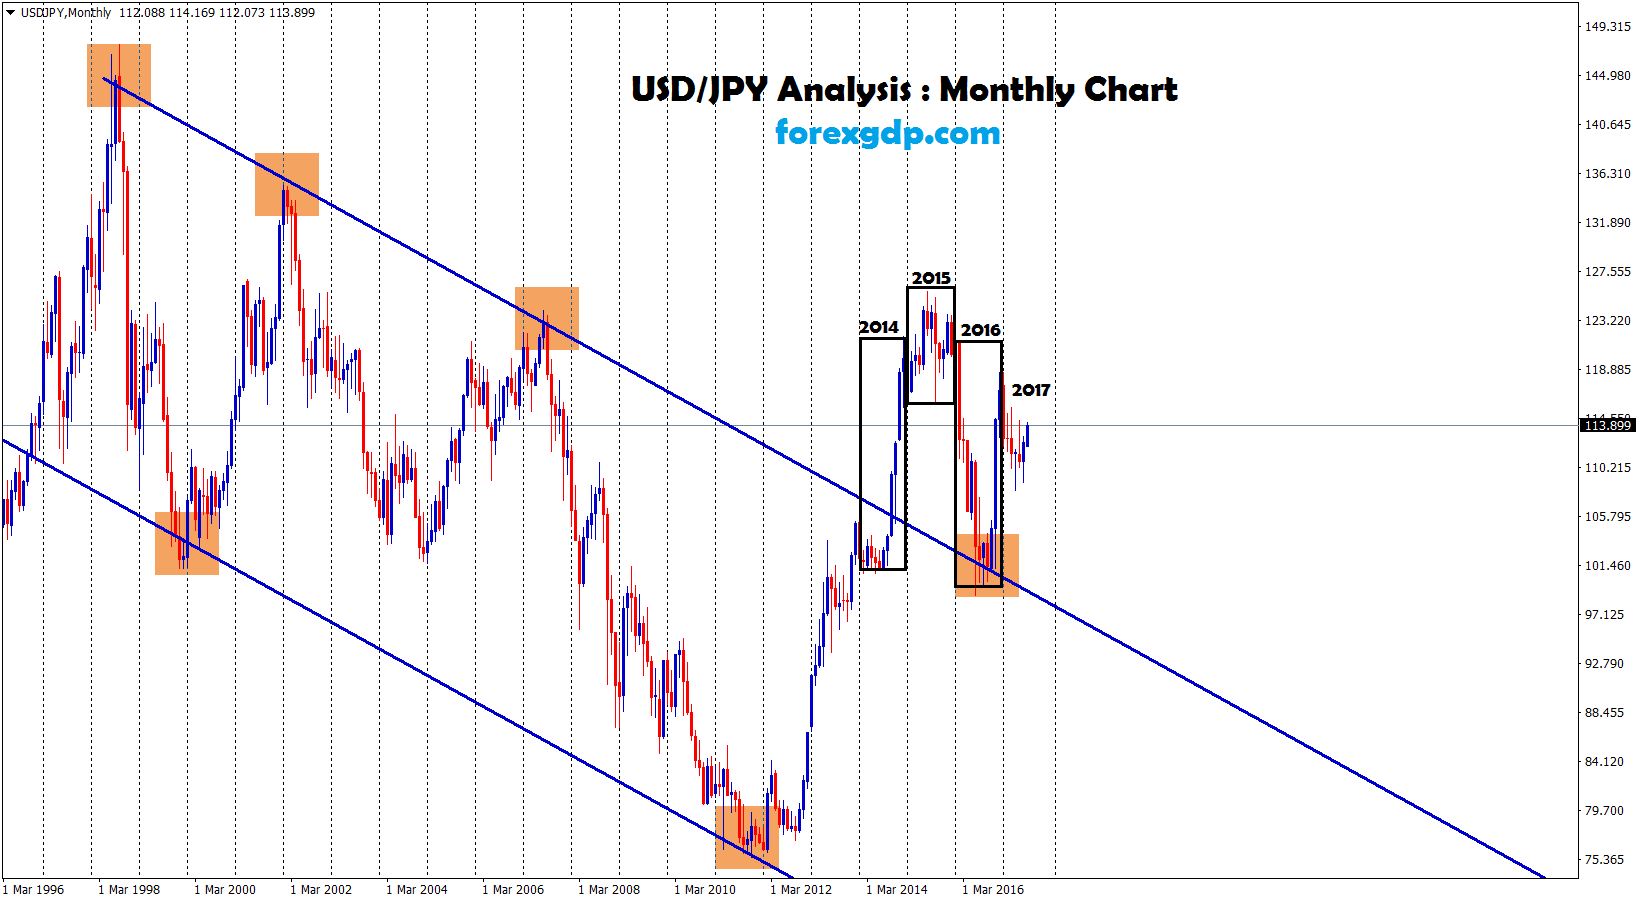 usdjpy forecast for yearly analysis